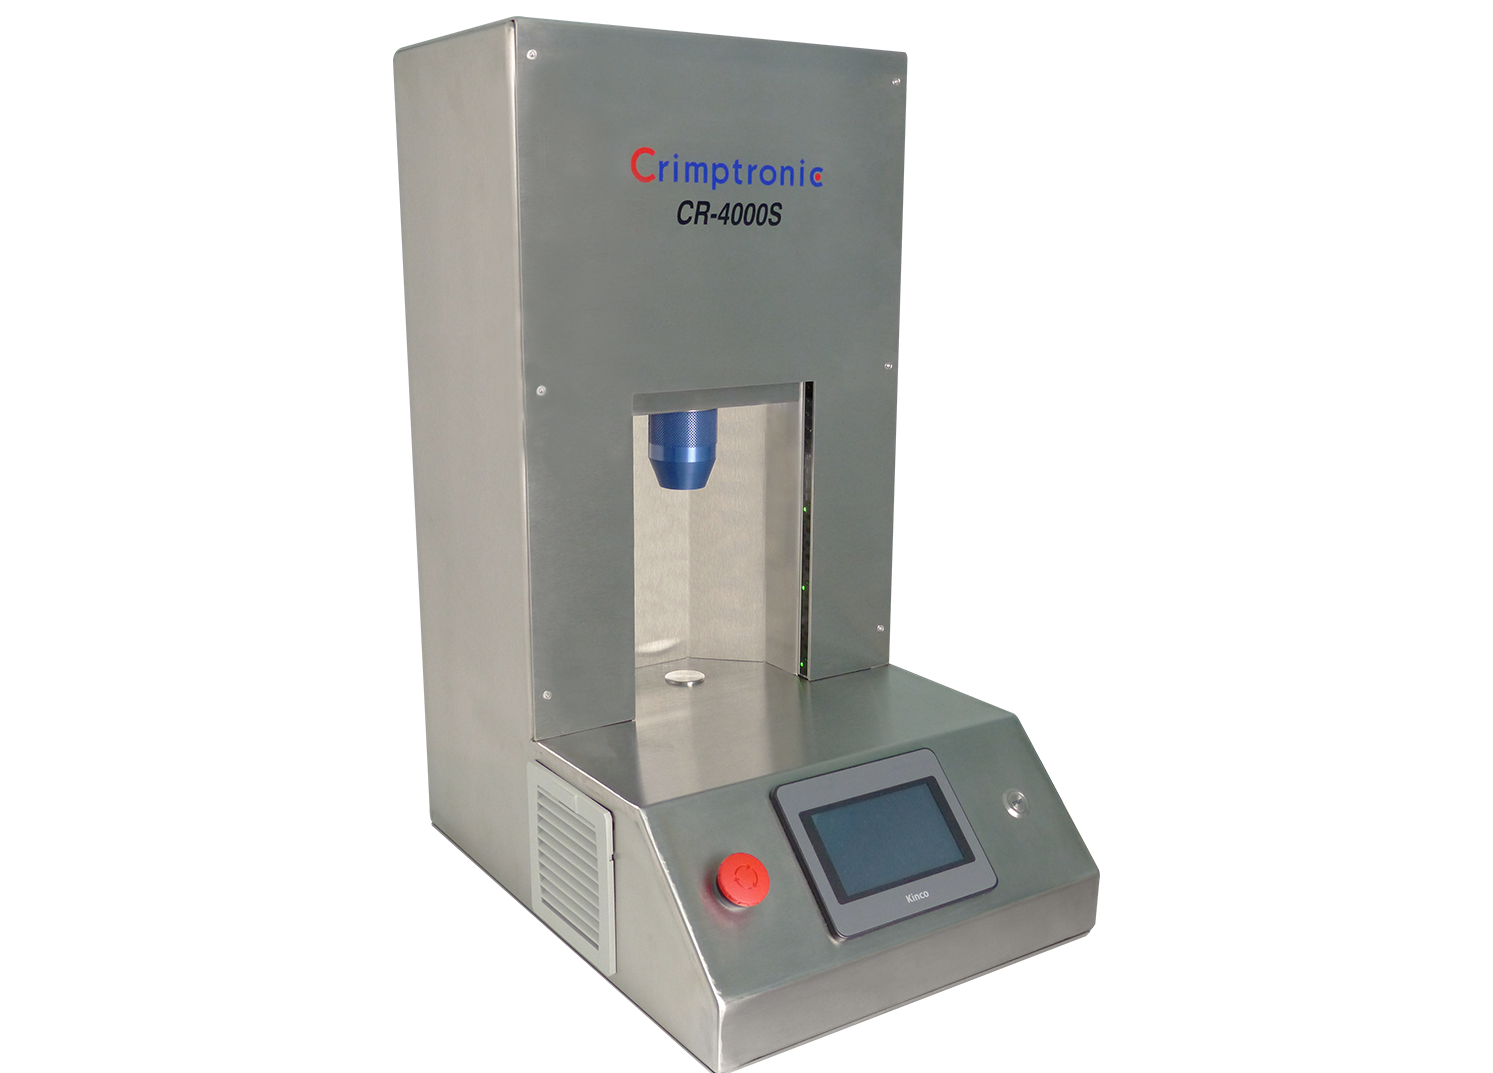 Electric crimping and decapping station for vials : CR-4000S